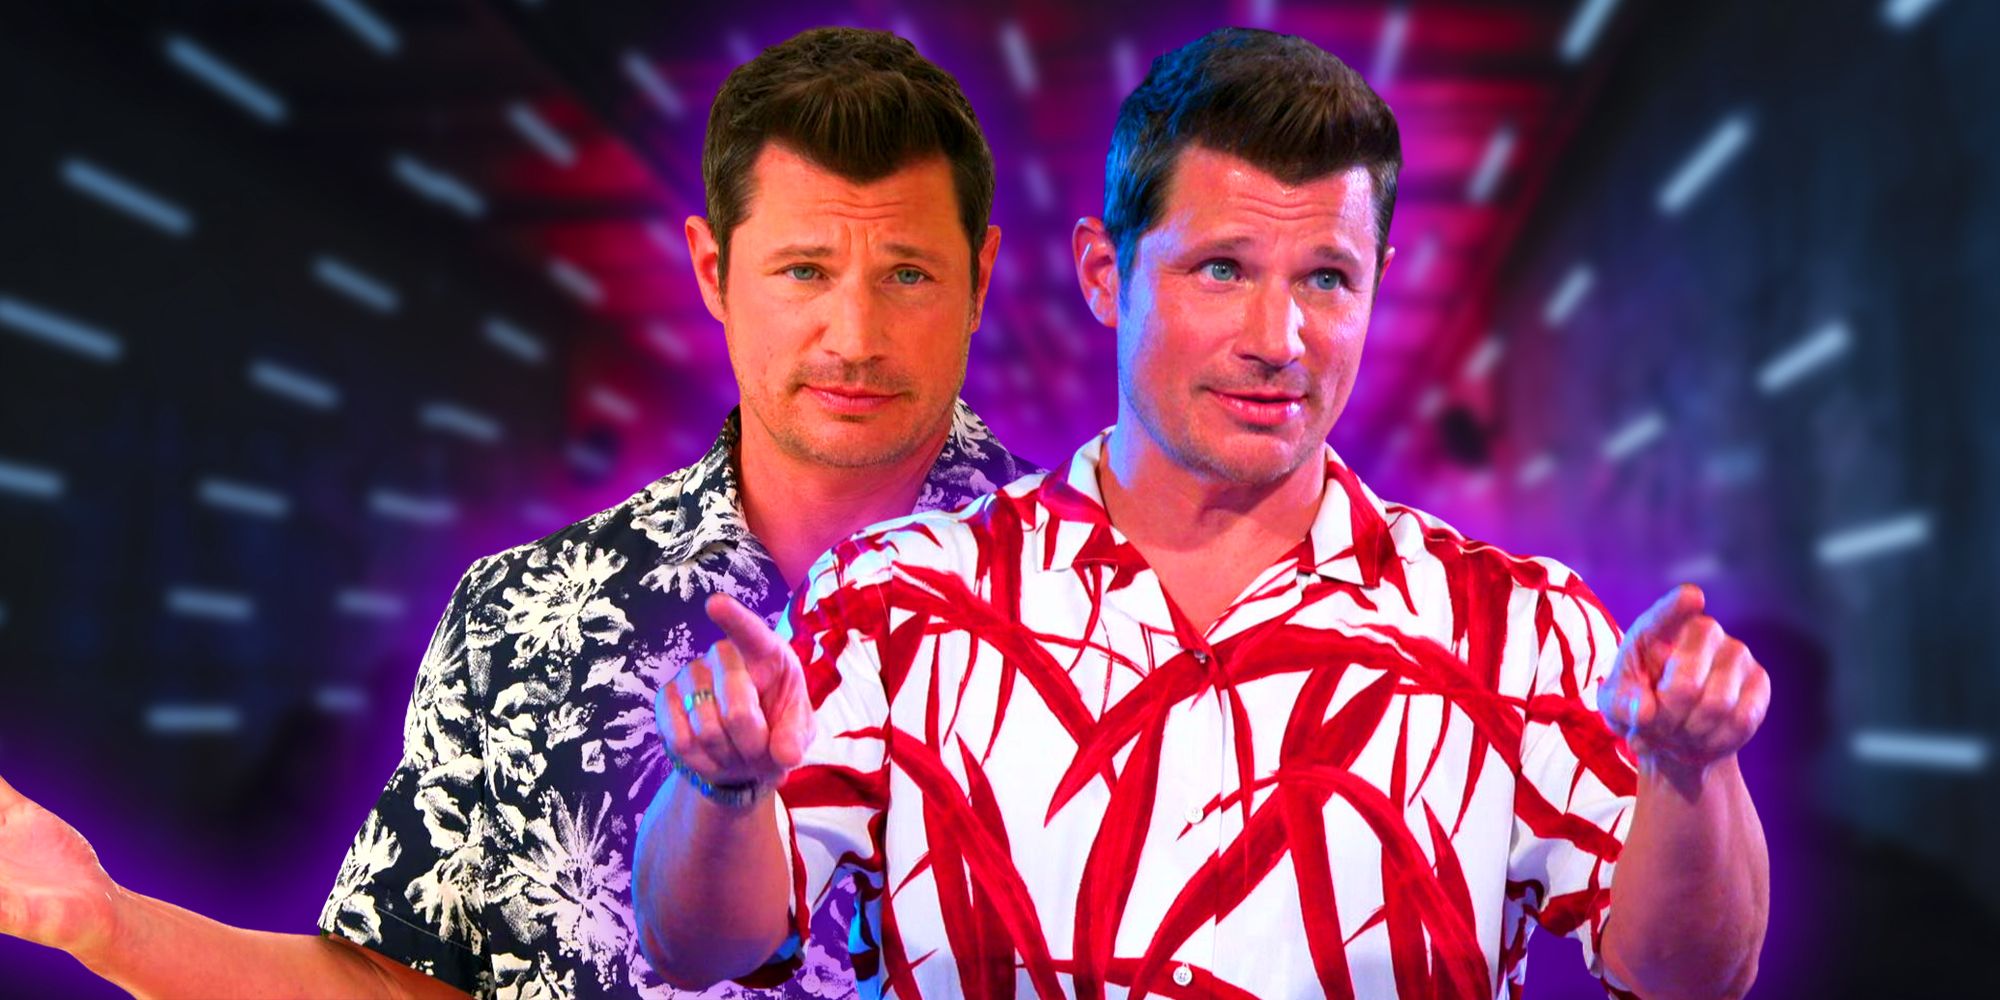 nick lachey in bright shirts the masked singer montage